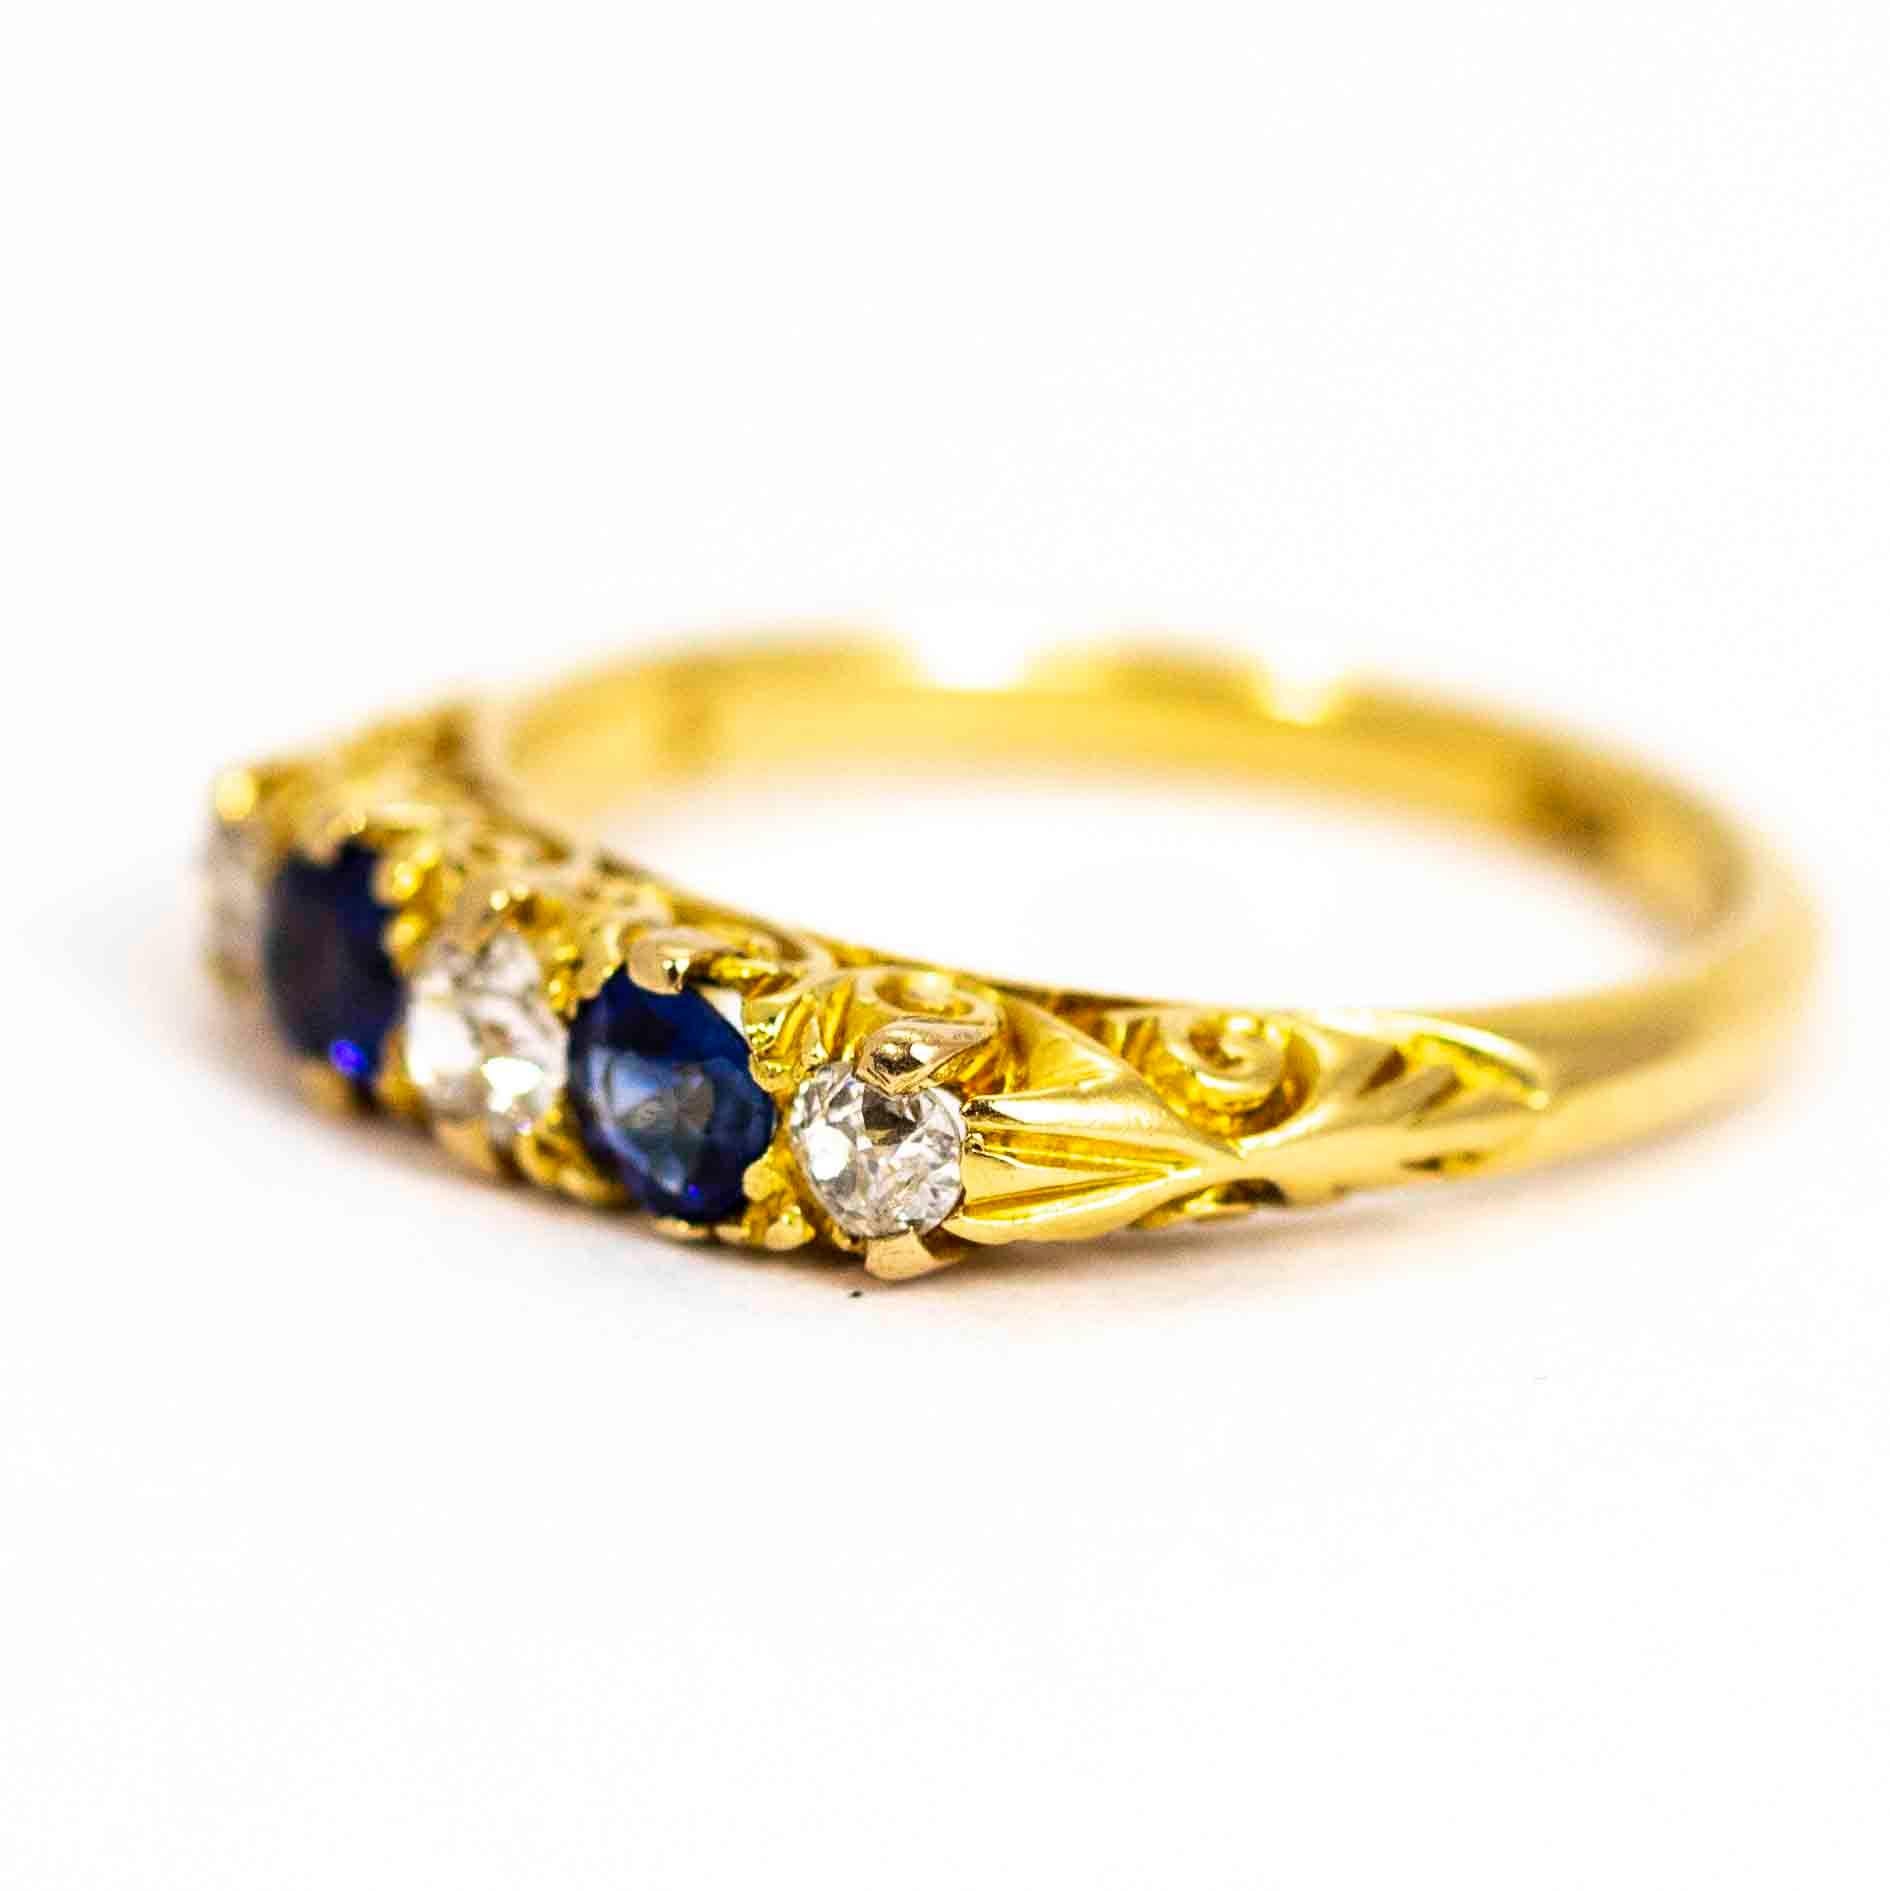 A stunning antique late Victorian five-stone ring set with blue sapphires and white old European cut diamonds. The central diamond measures approximately 15 points, the diamonds at the ends measure approximately 10 points each. Total diamond weight